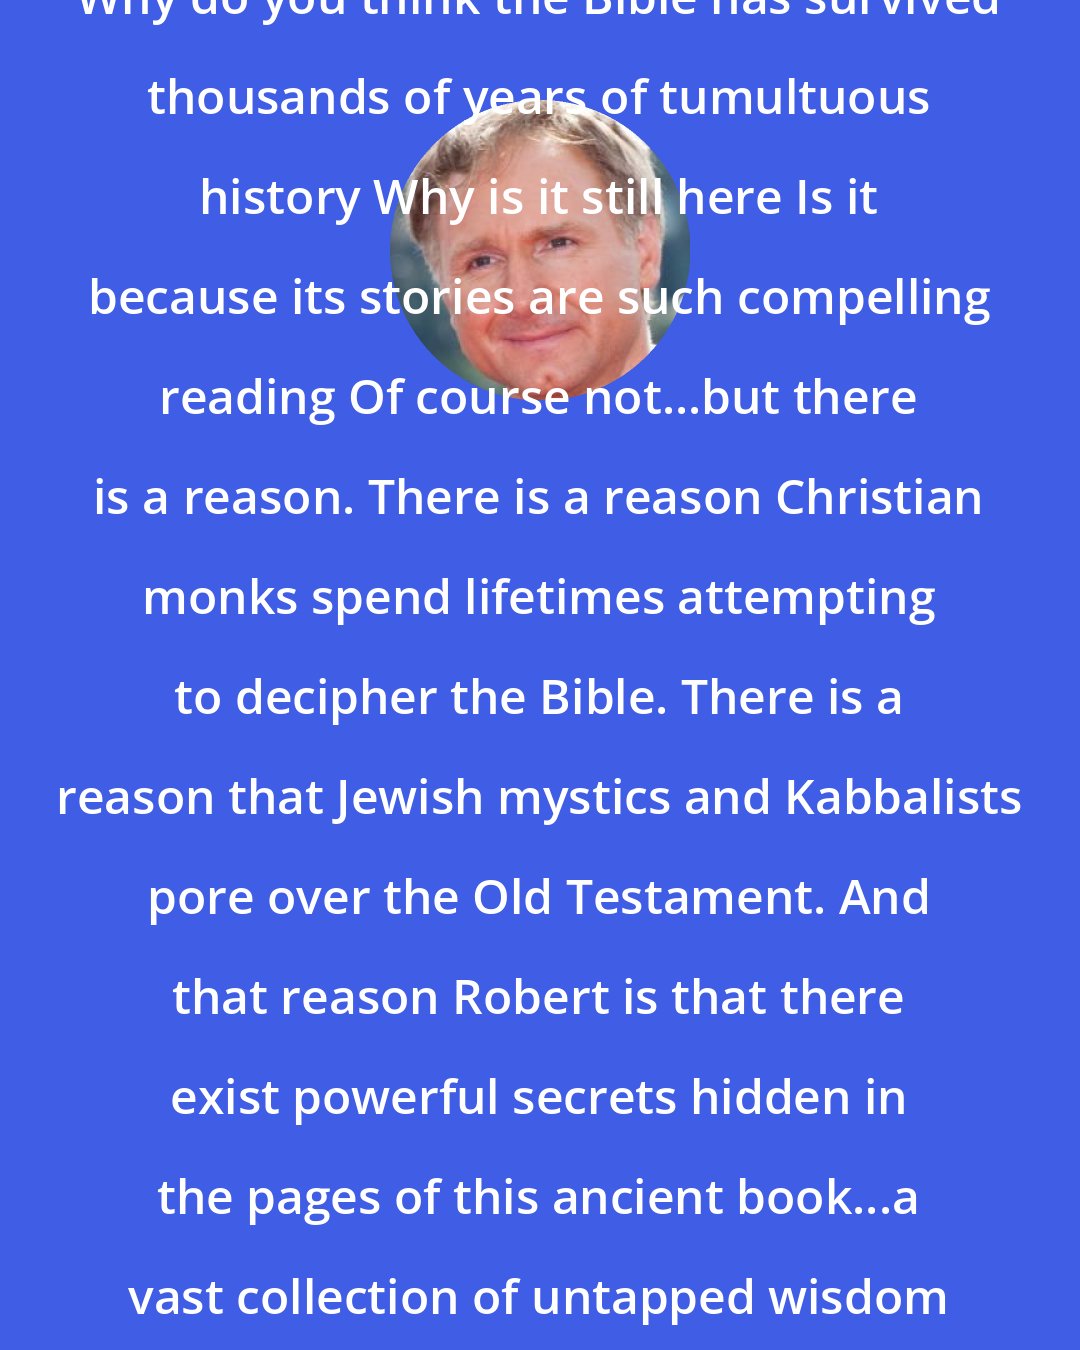 Dan Brown: Why do you think the Bible has survived thousands of years of tumultuous history Why is it still here Is it because its stories are such compelling reading Of course not...but there is a reason. There is a reason Christian monks spend lifetimes attempting to decipher the Bible. There is a reason that Jewish mystics and Kabbalists pore over the Old Testament. And that reason Robert is that there exist powerful secrets hidden in the pages of this ancient book...a vast collection of untapped wisdom waiting to be unveiled.